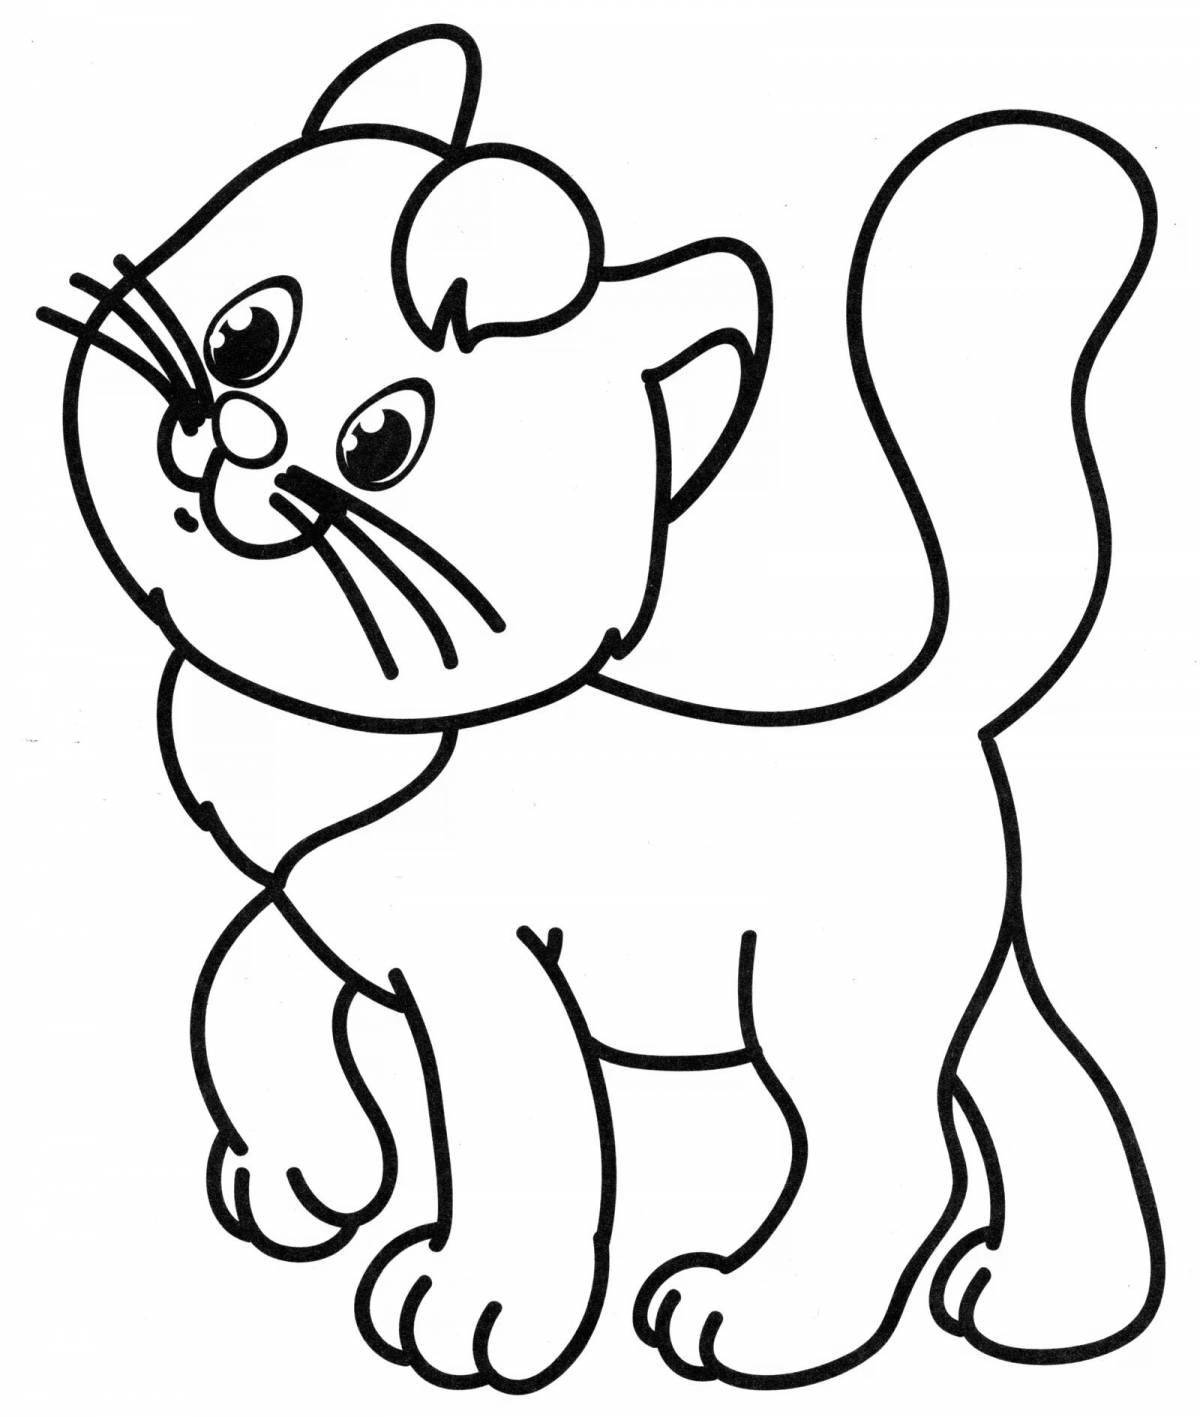 Kitty animated coloring book for 2-3 year olds